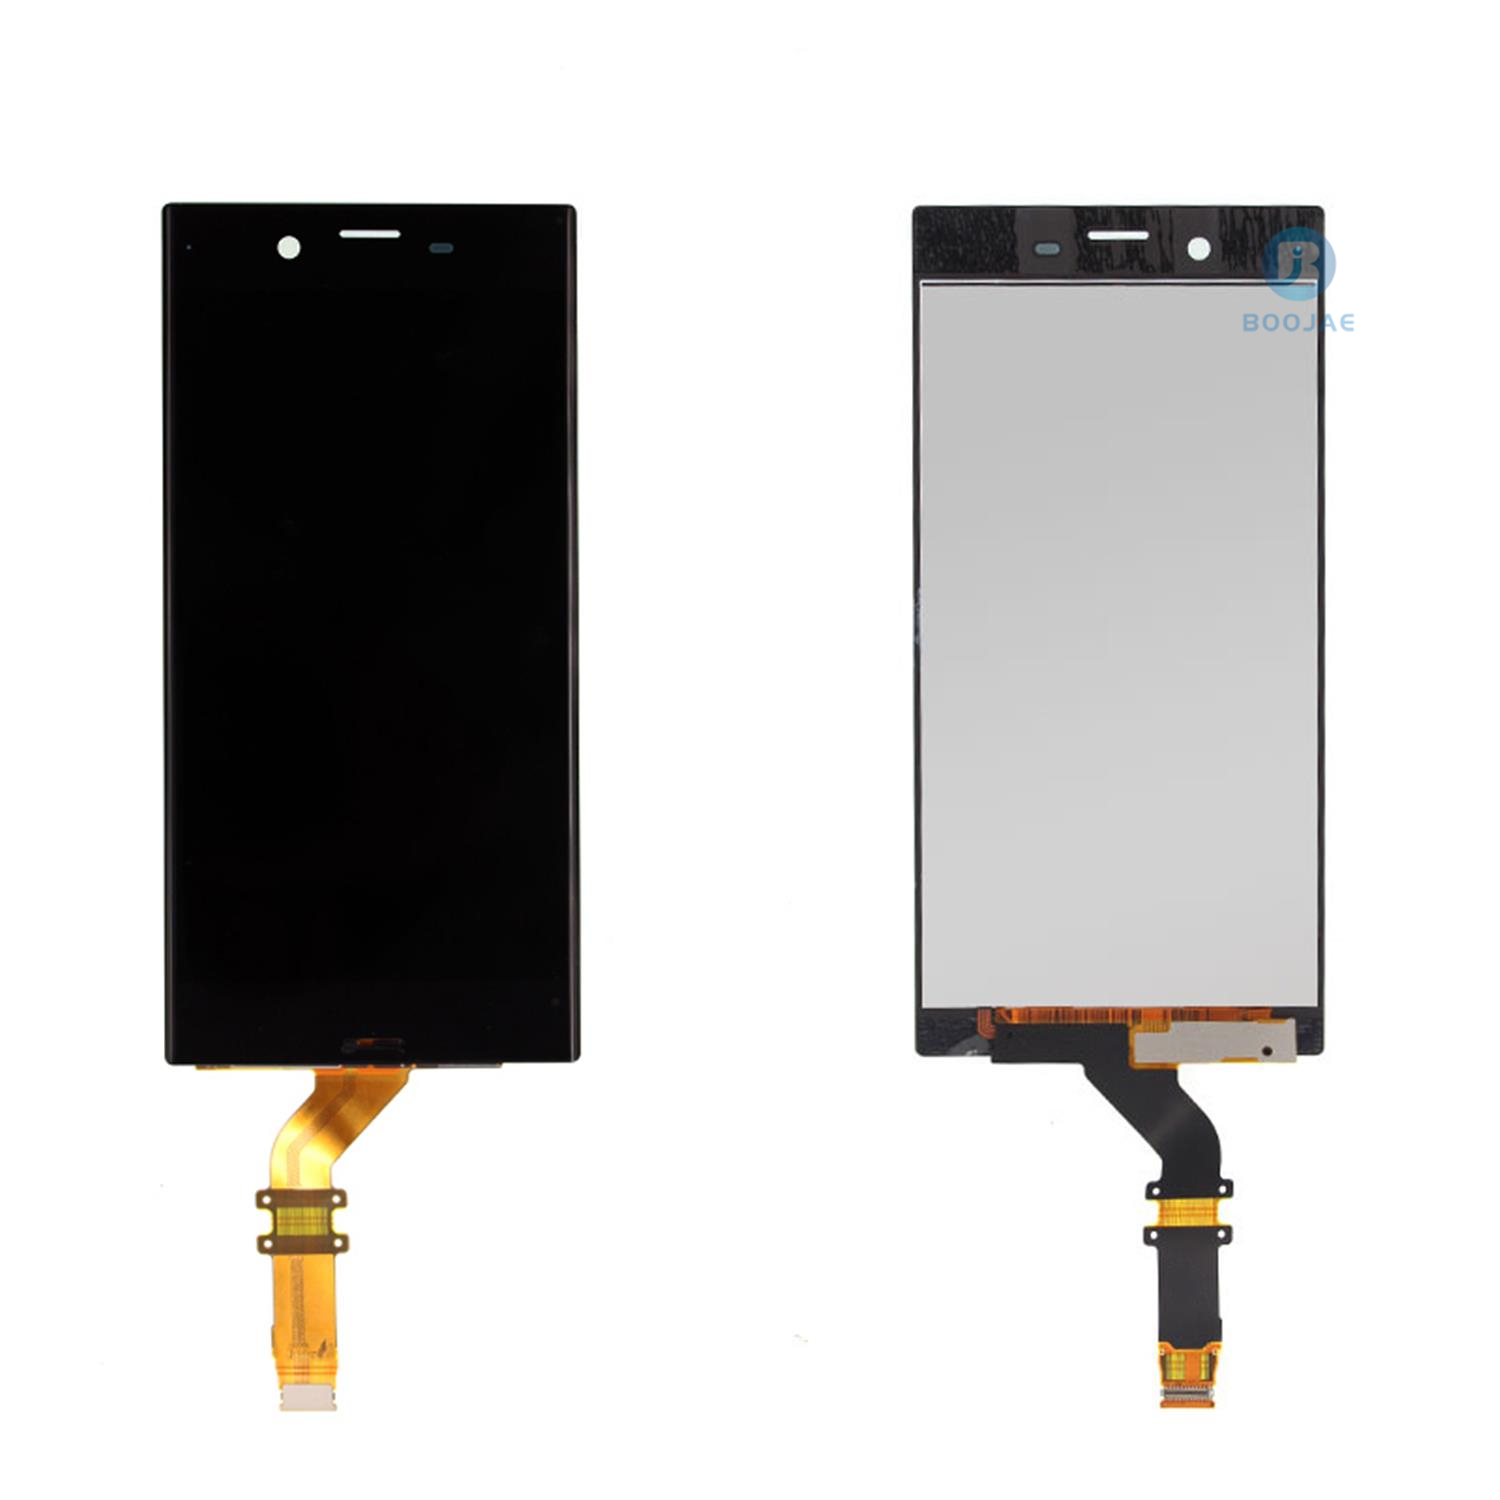 Sony Xperia XZ Lcd Screen Display, Lcd Assembly Replacement